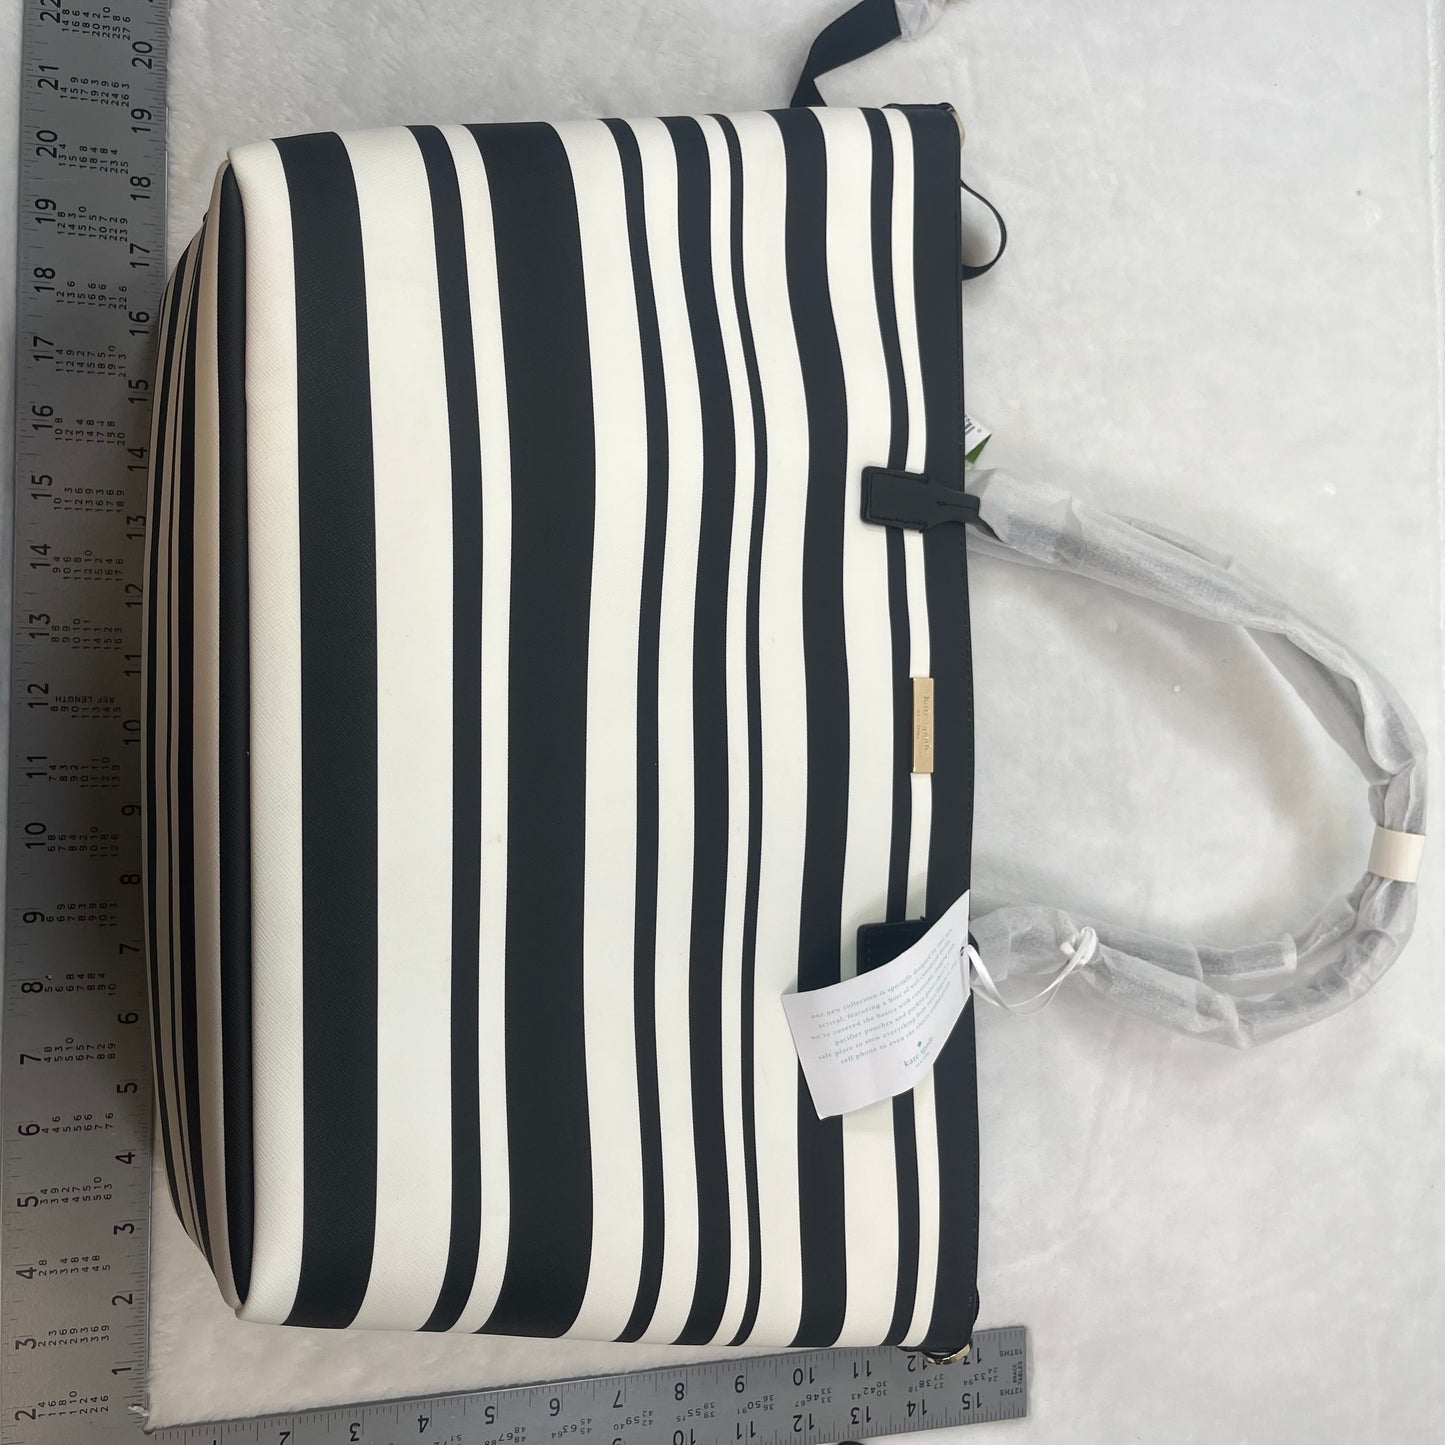 Diaper Bag By Kate Spade  Size: Large